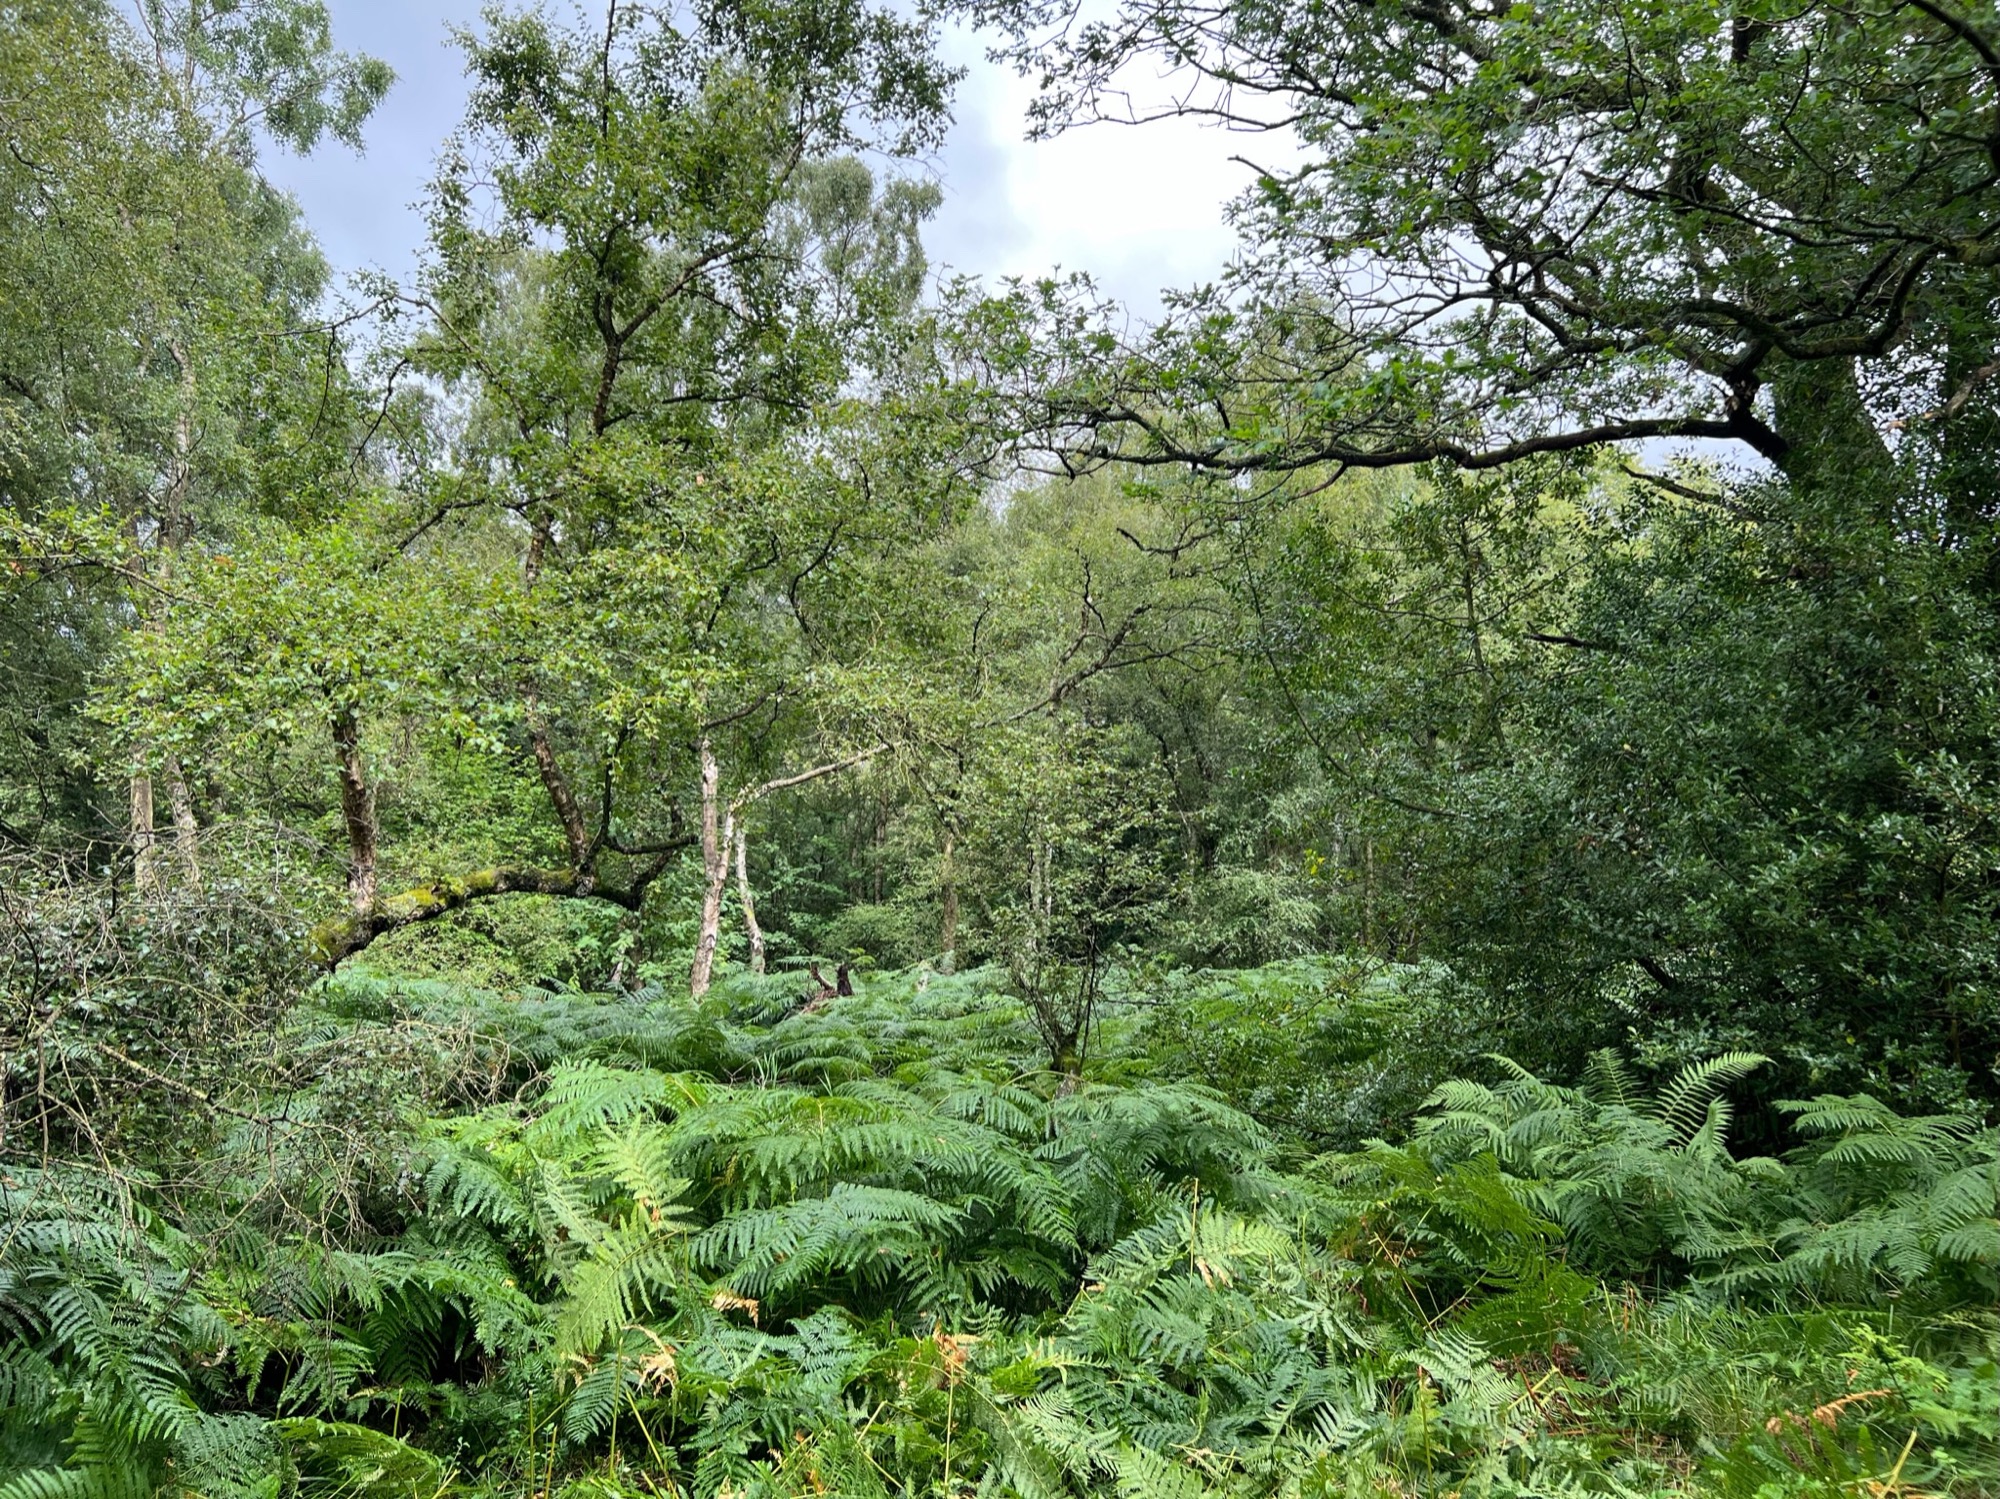 A view of one of the glades, which need some bracken management